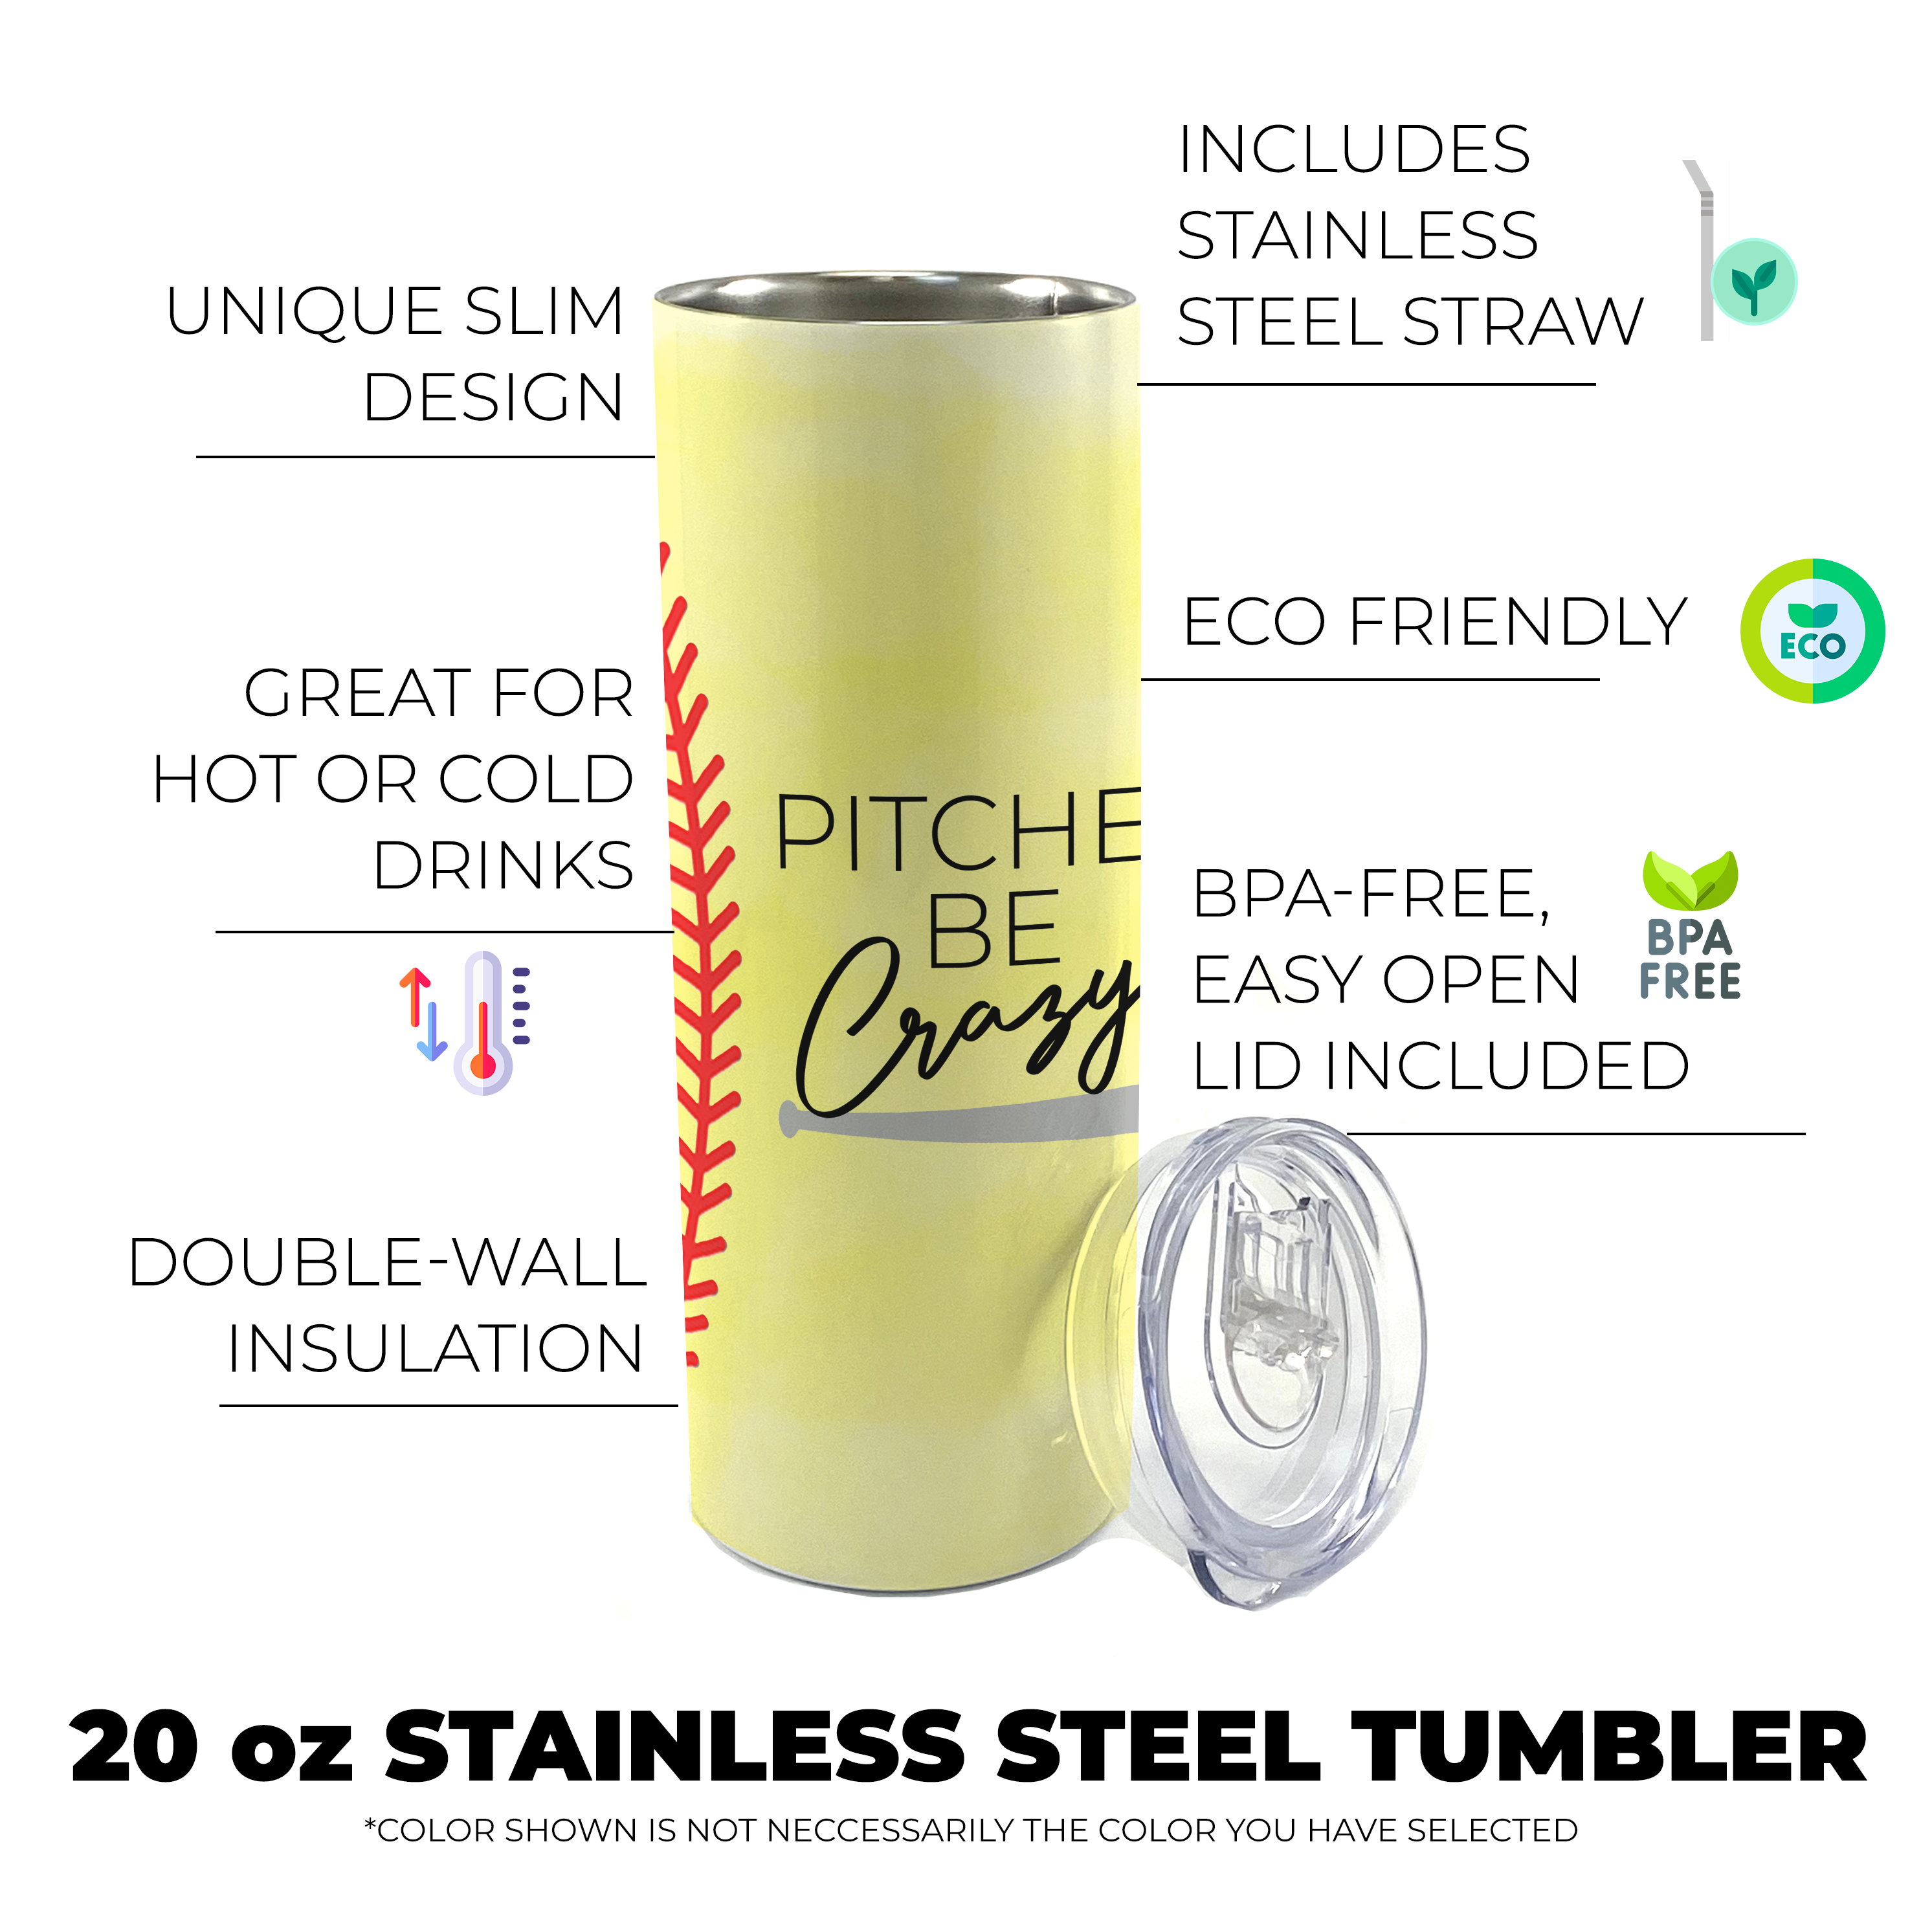 Sports Collection (Pitches Be Crazy - Softball) 20 Oz Stainless Steel Travel Tumbler with Straw